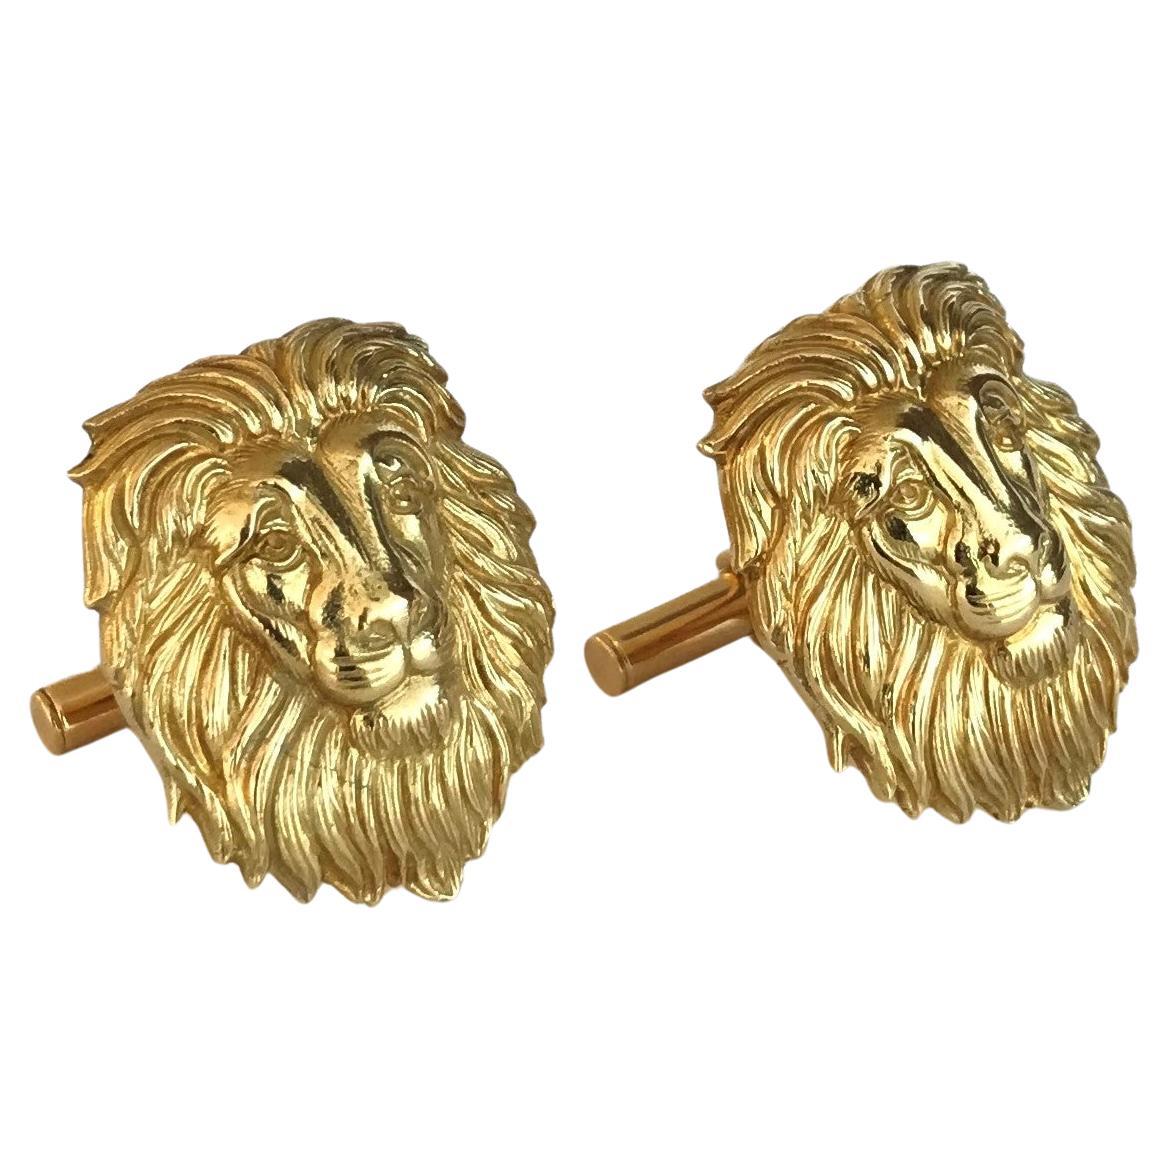 Rosior "Lion" Cufflinks Hand Chiseled in Yellow Gold